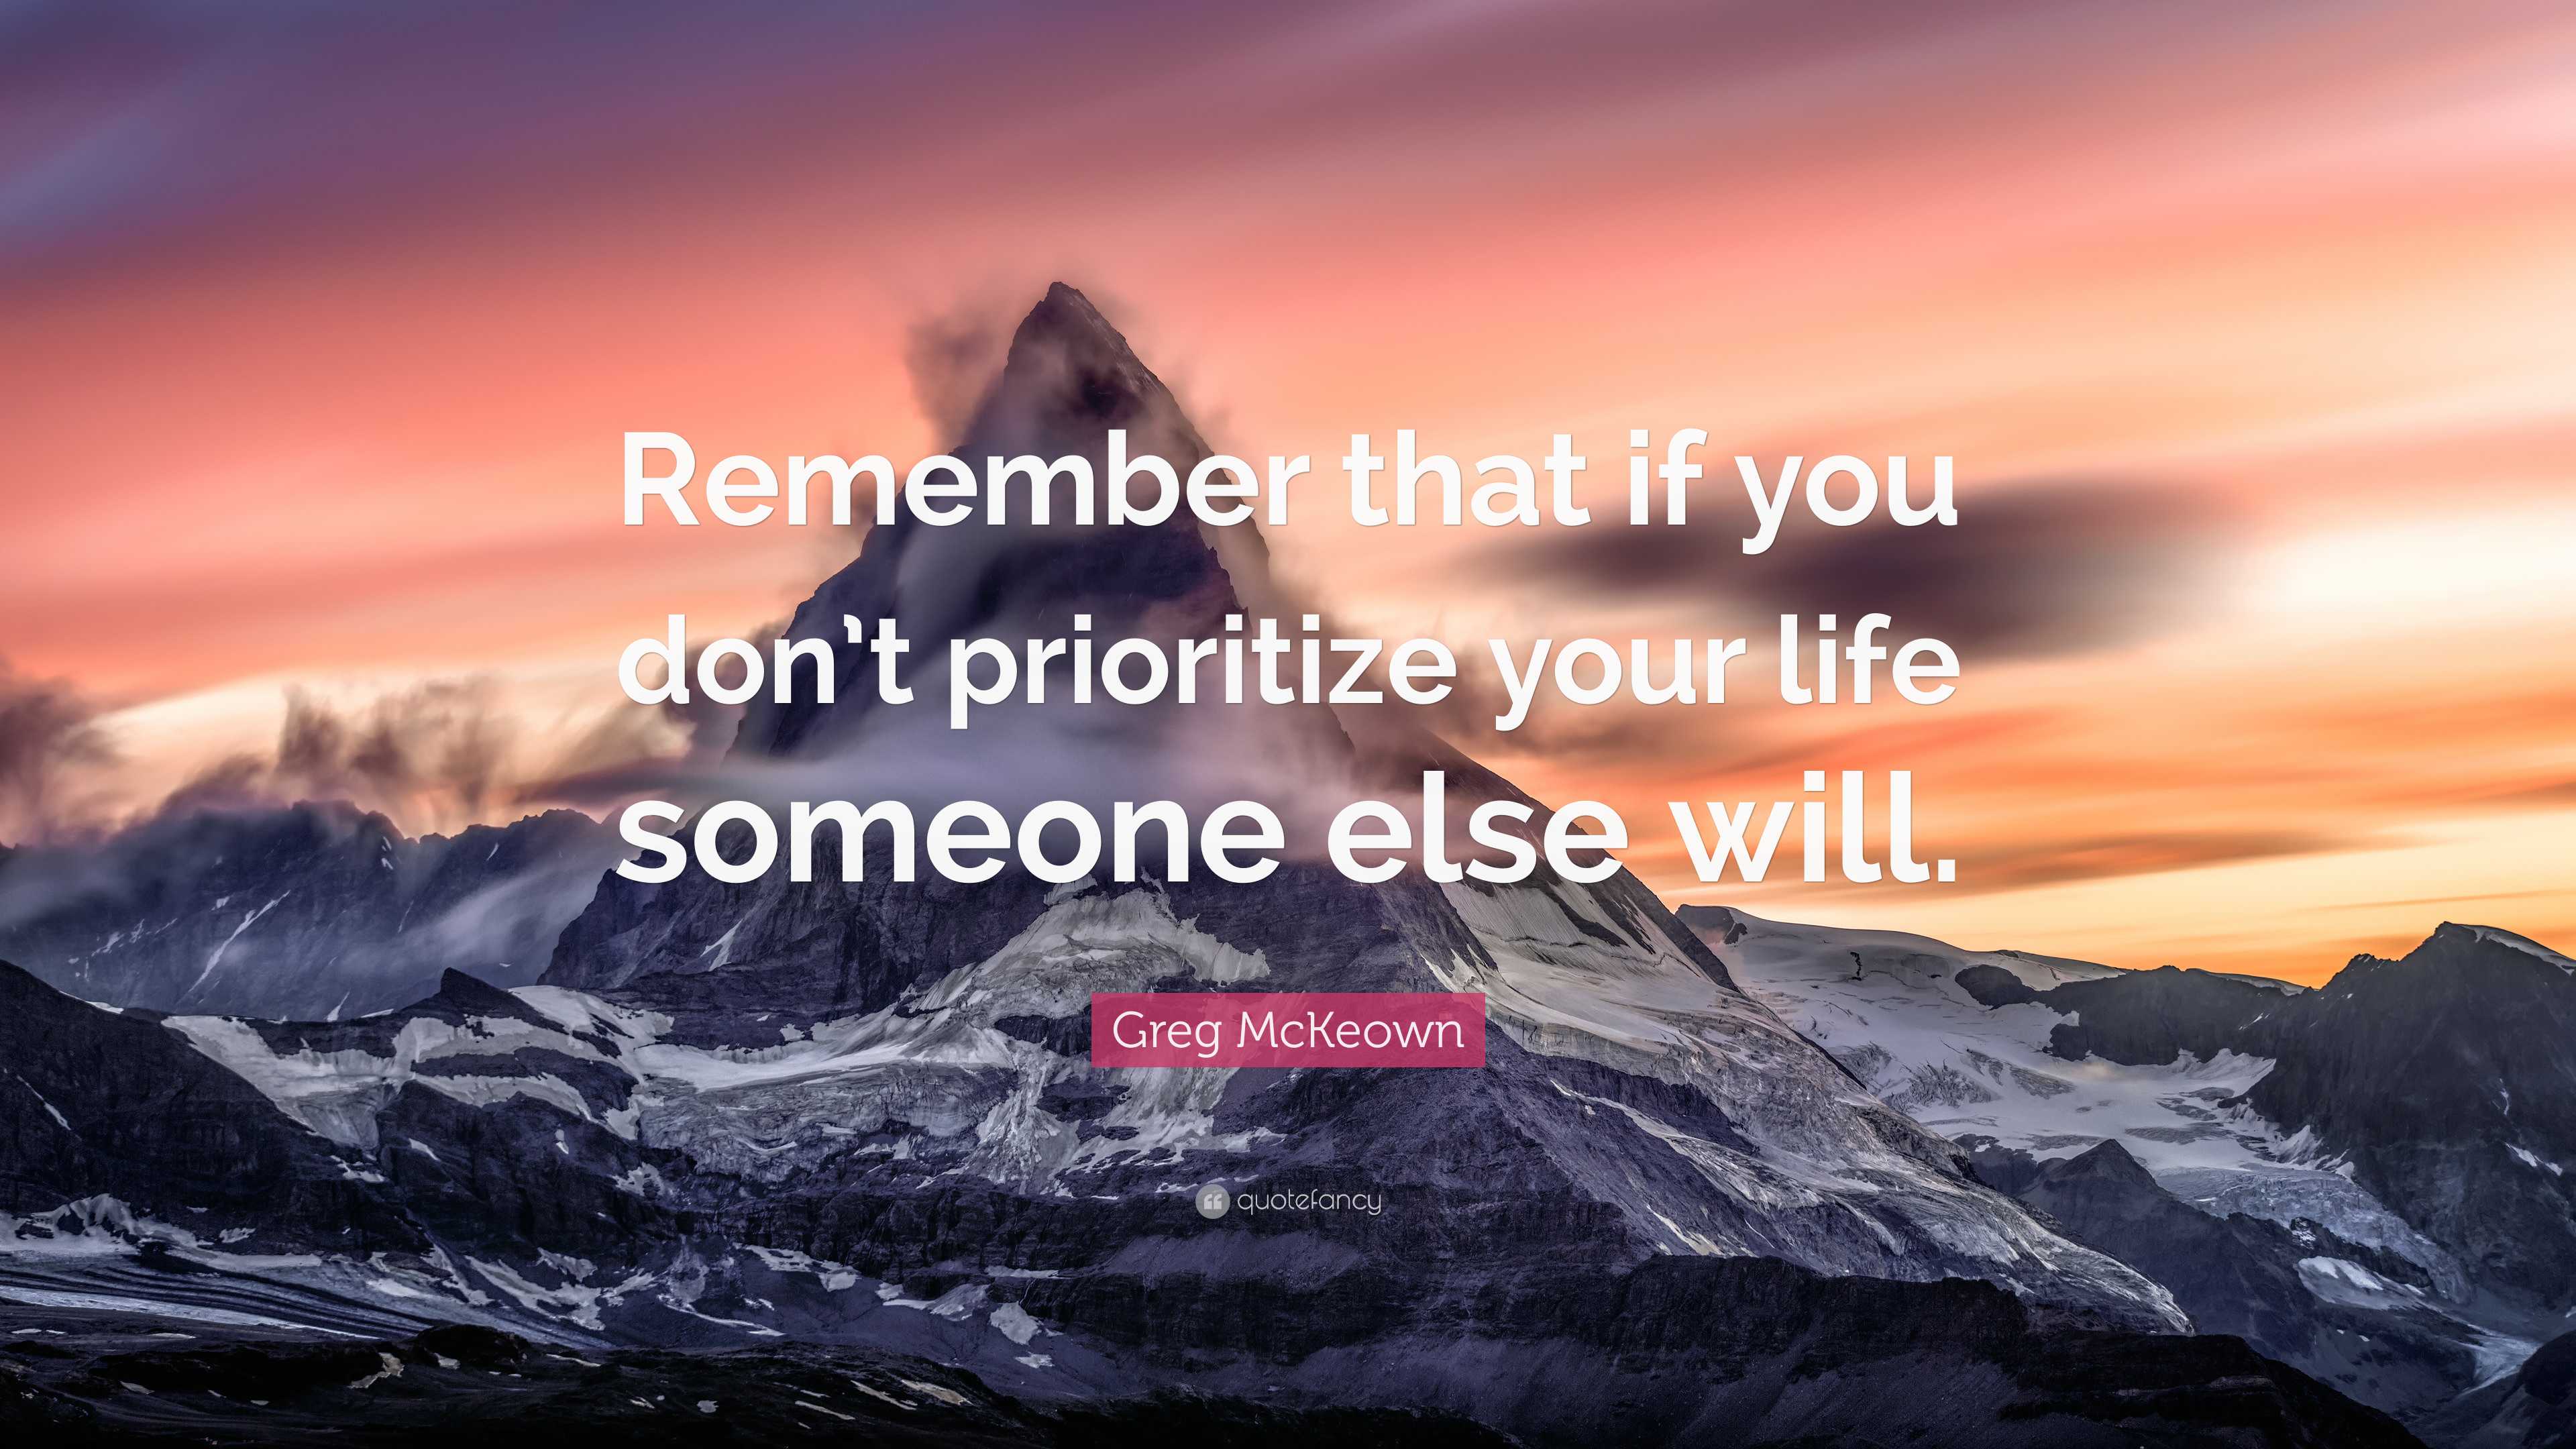 If You Don't Prioritize Your Life, Someone Else Will - Further